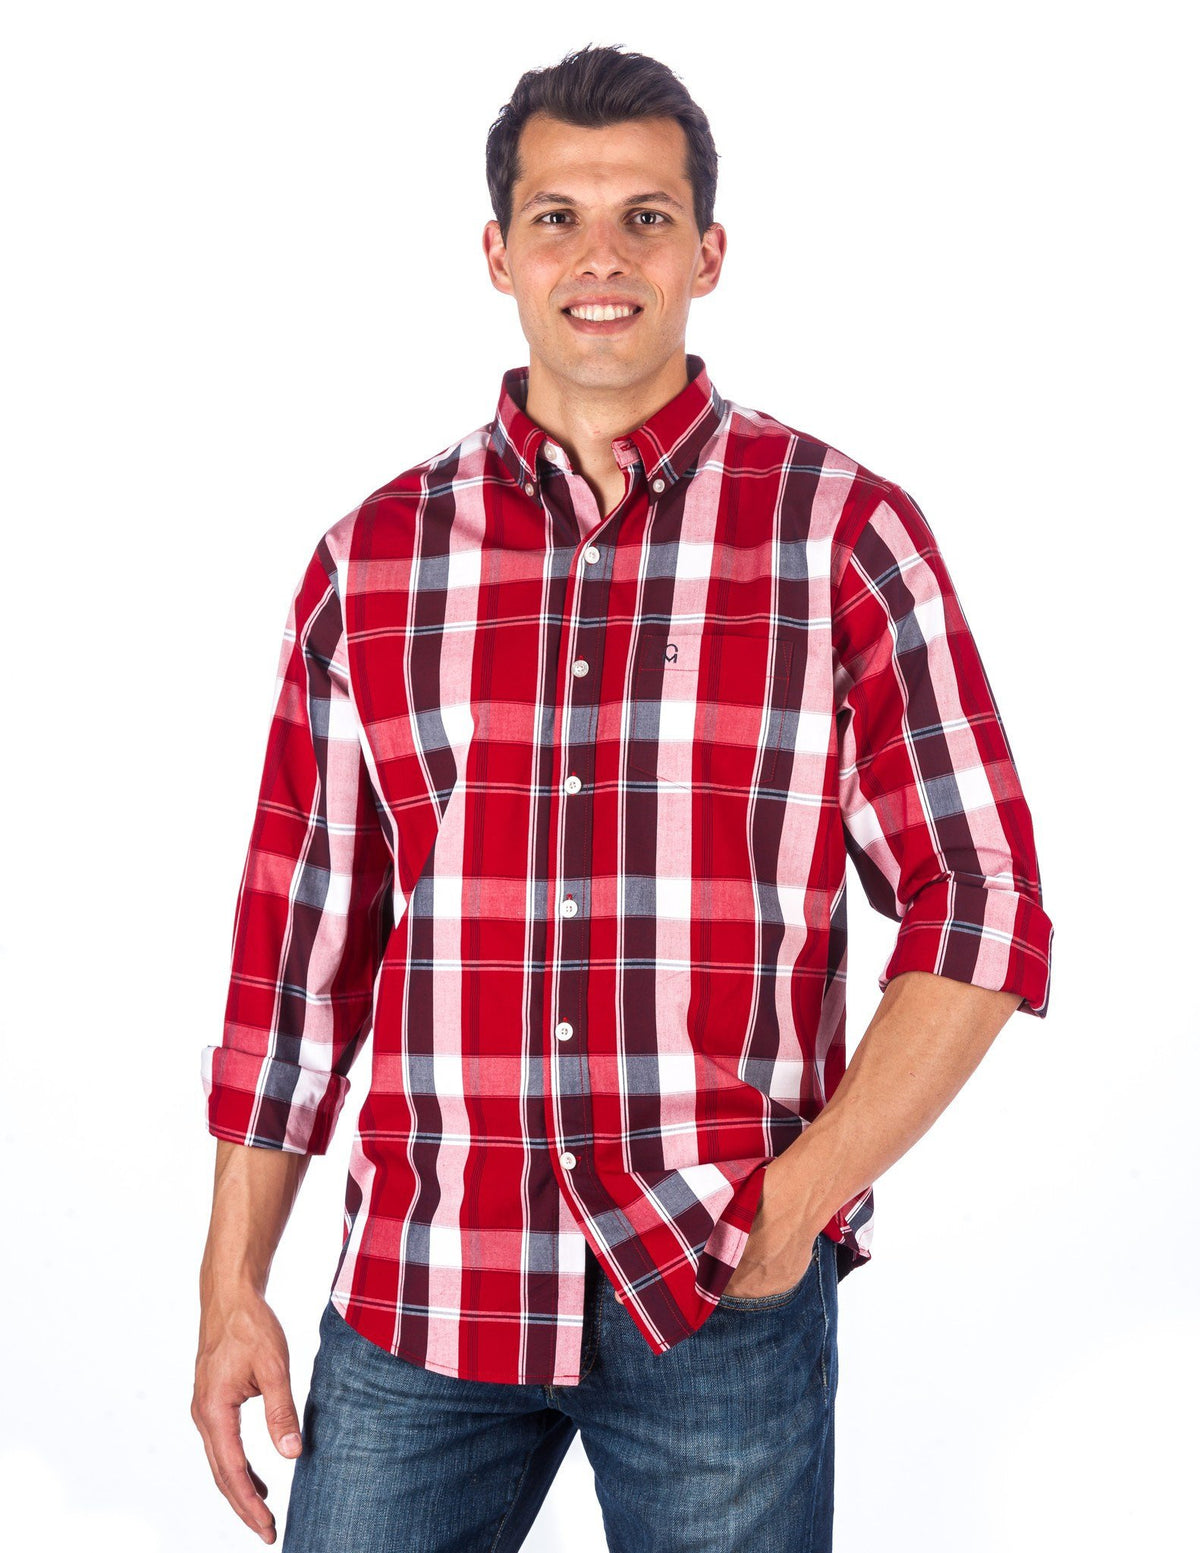 Men's 100% Cotton Casual Shirt - Regular Fit - Plaid Red/White/Navy